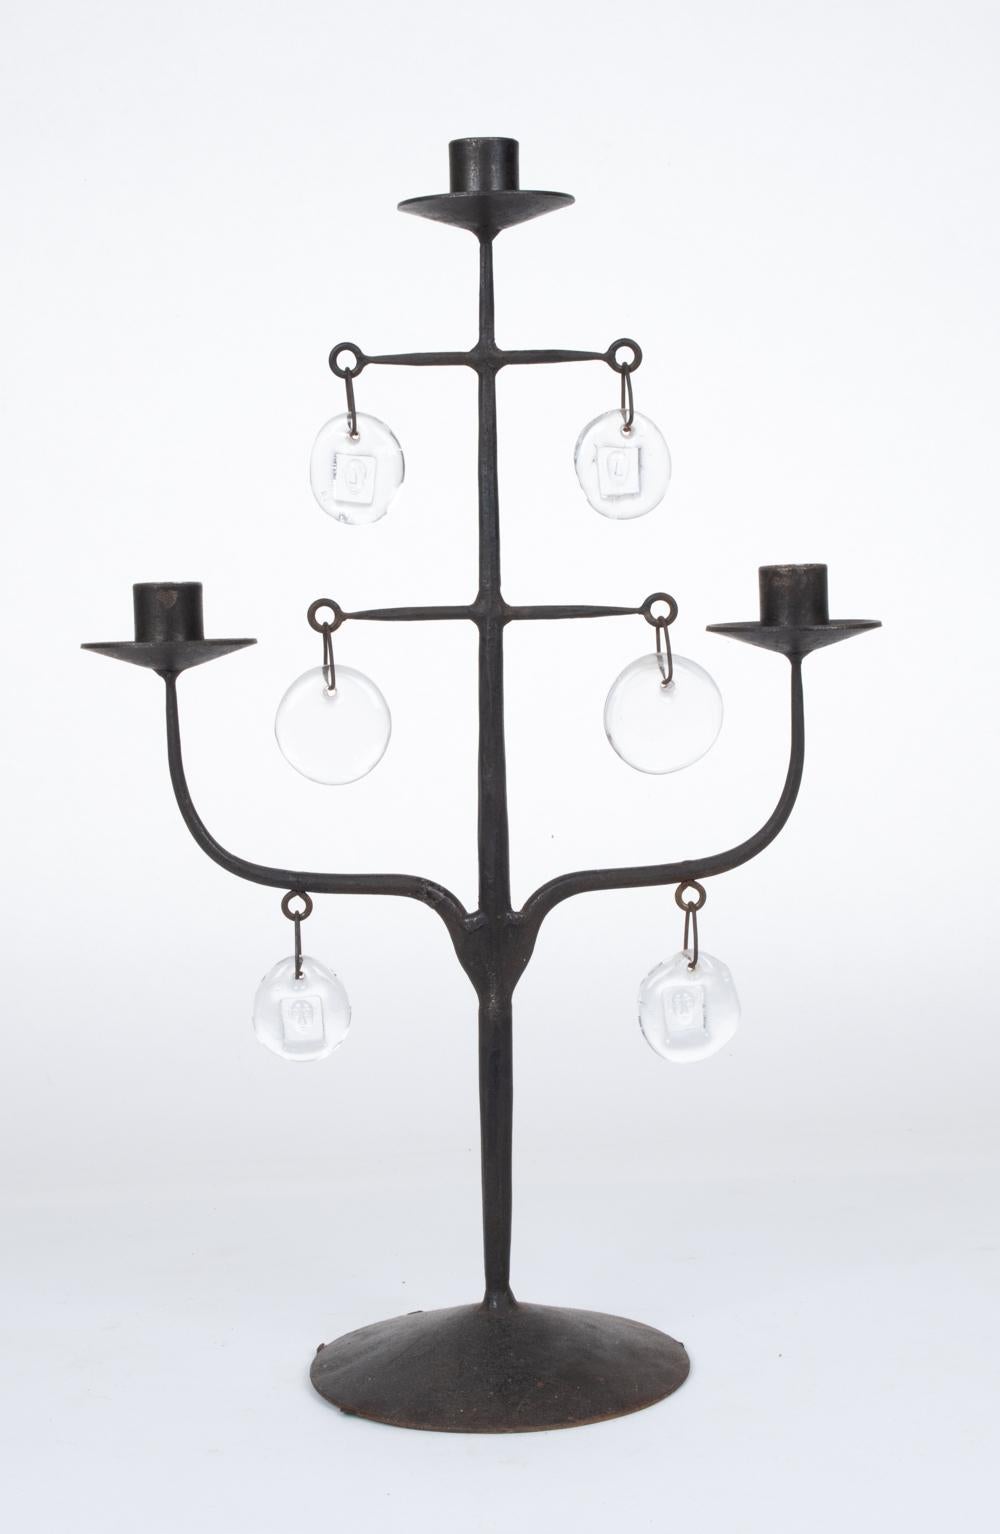 A rare and unusual sculptural candelabra designed by Erik Hoglund for Boda Nova, Sweden. This three-light candle holder features a hand-crafted body of forged iron with Boda glass medallion drops, four of which are sculpted with impressed modernist